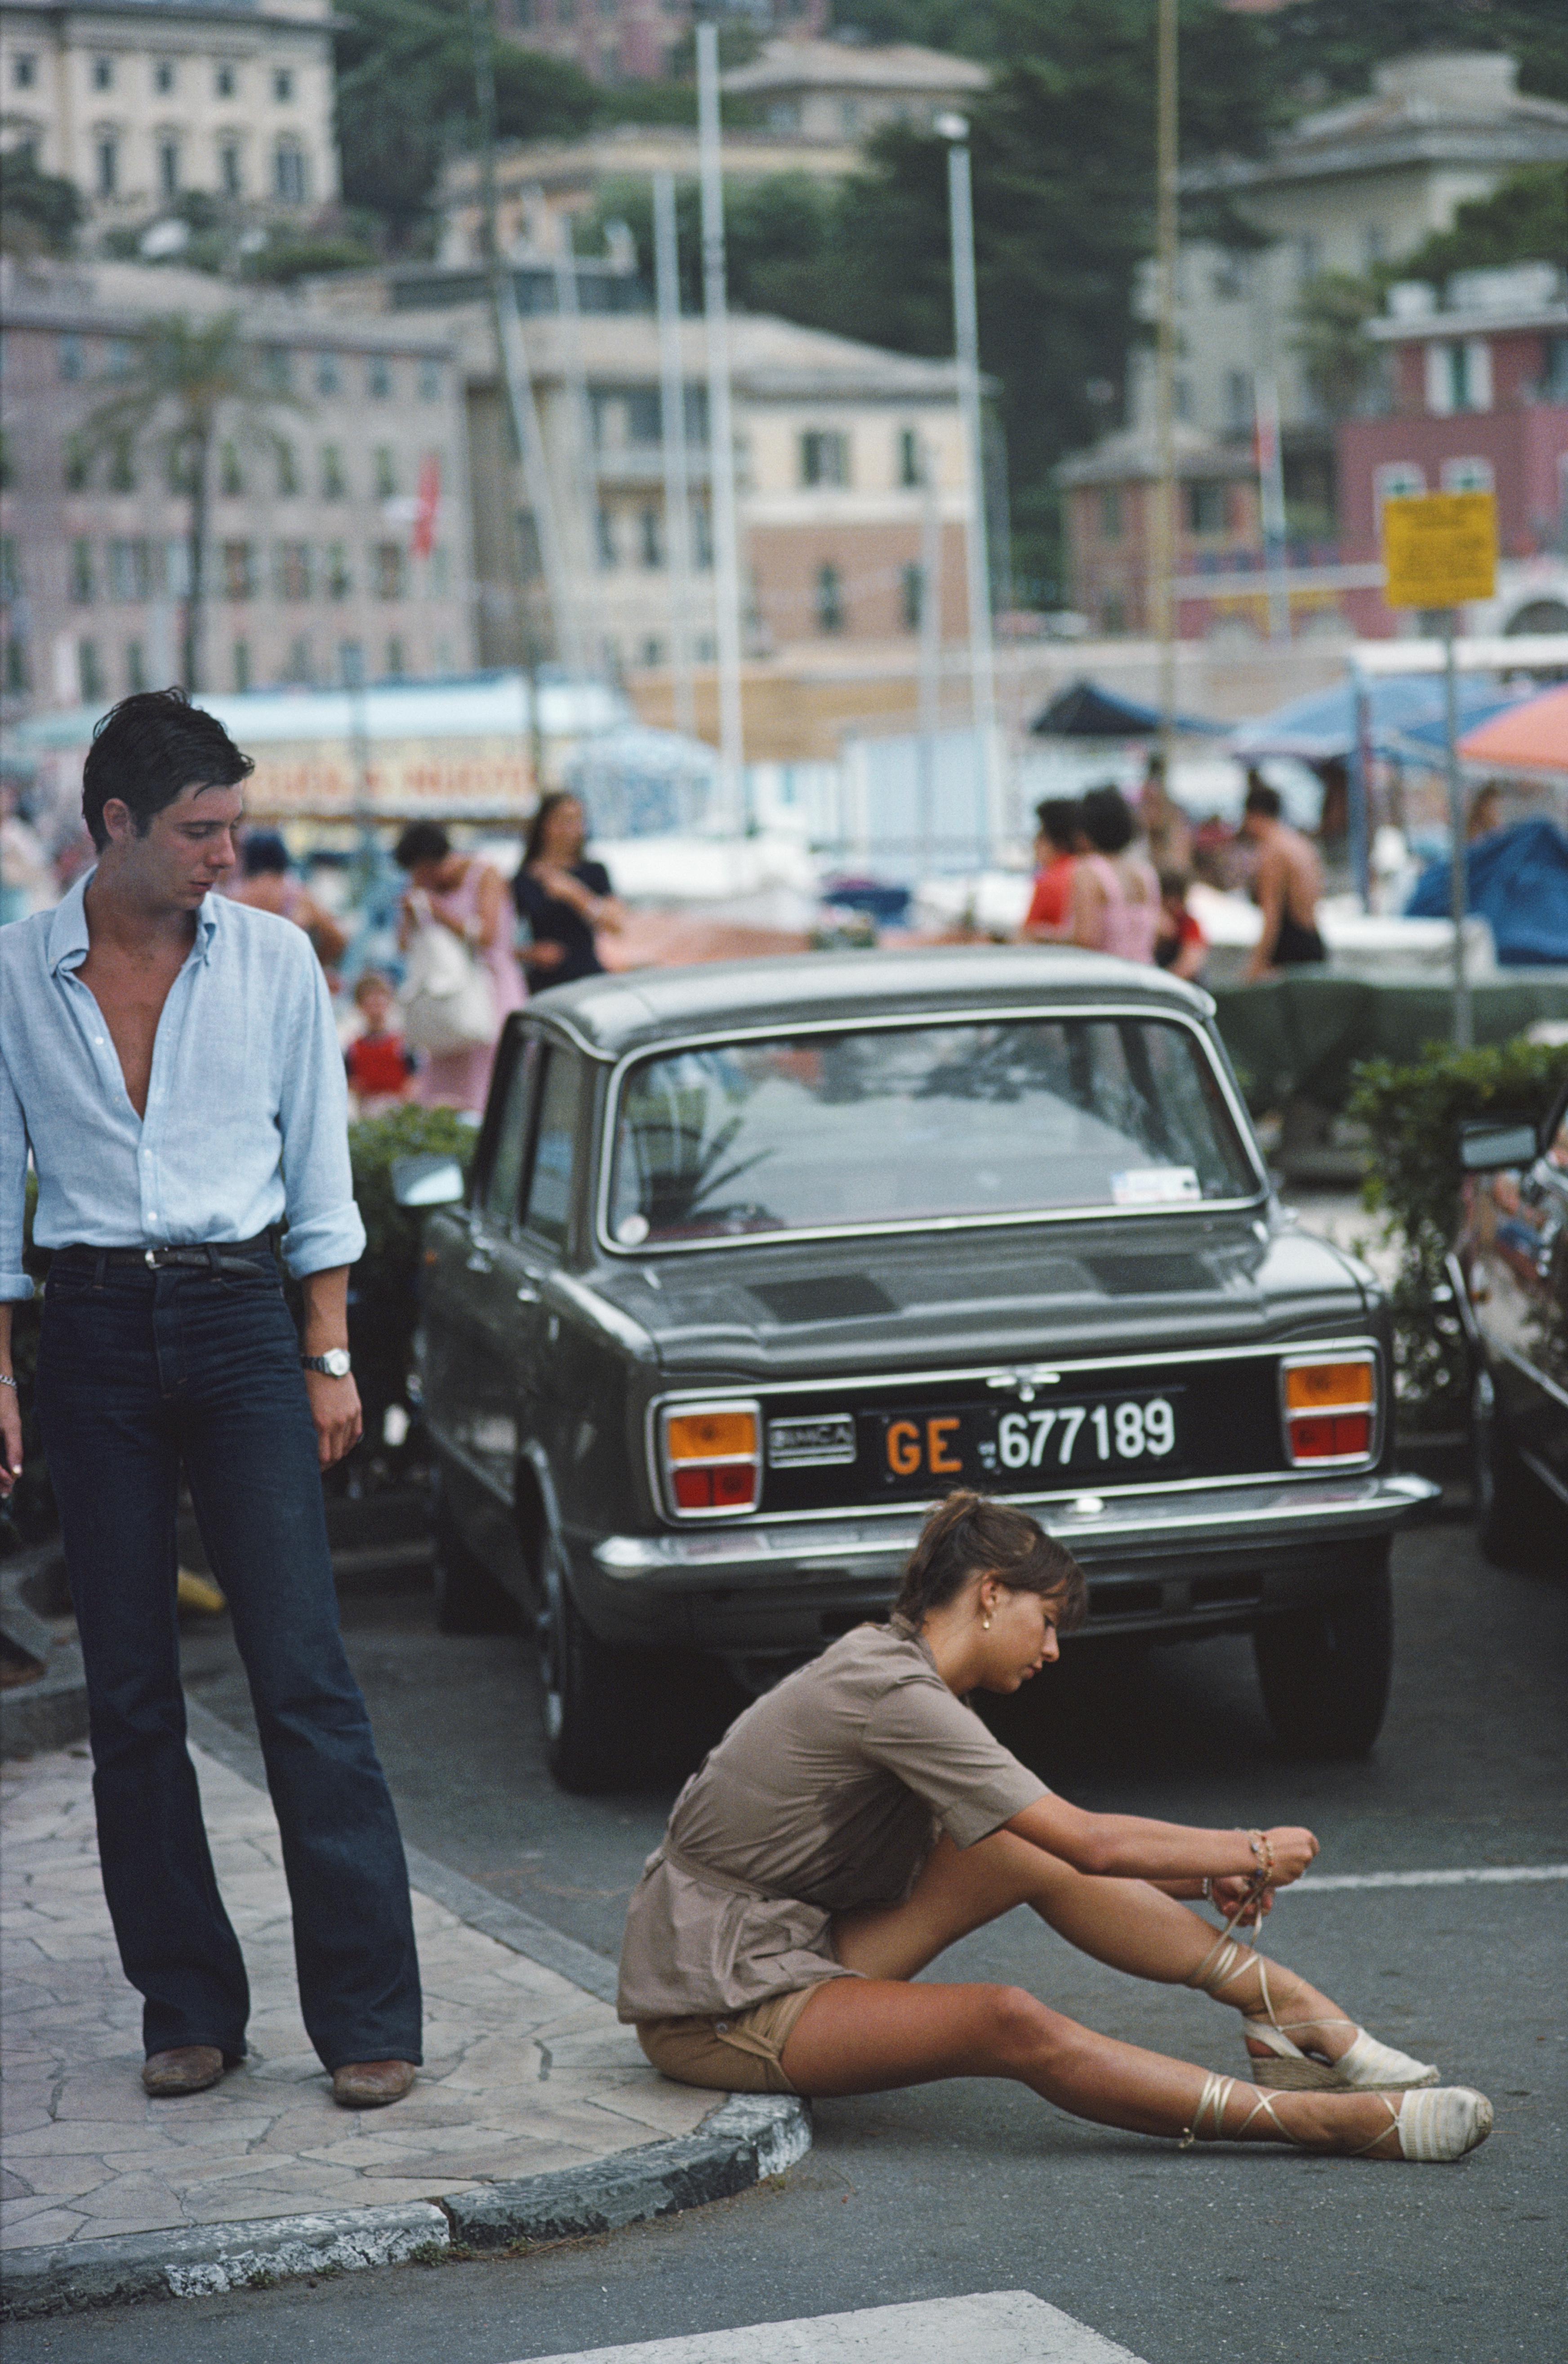 'Port Life' 1977 Slim Aarons Limited Estate Edition Print 

A man stops to watch a young woman tie her sandals on the pavement in Portofino marina, August 1977.

Produced from the original transparency
Certificate of authenticity supplied 
Archive